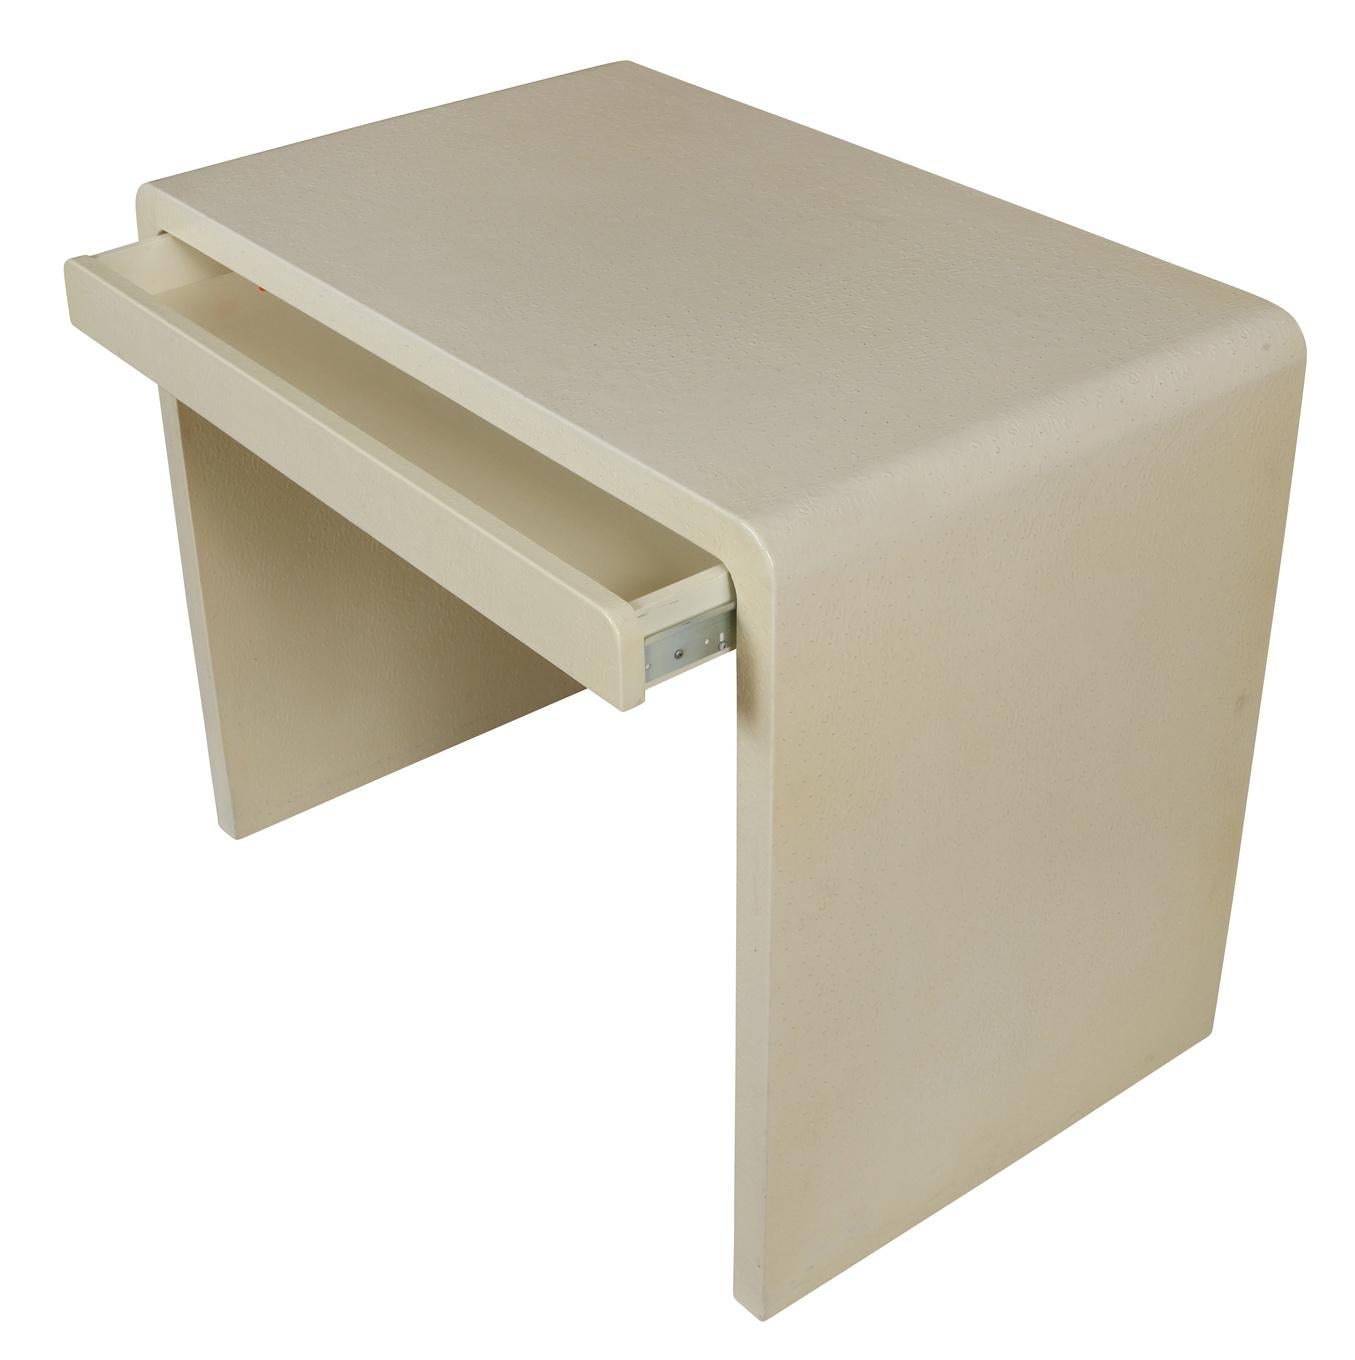 Mid-Century Modern textured and wrapped white leather desk with waterfall edge and one drawer.